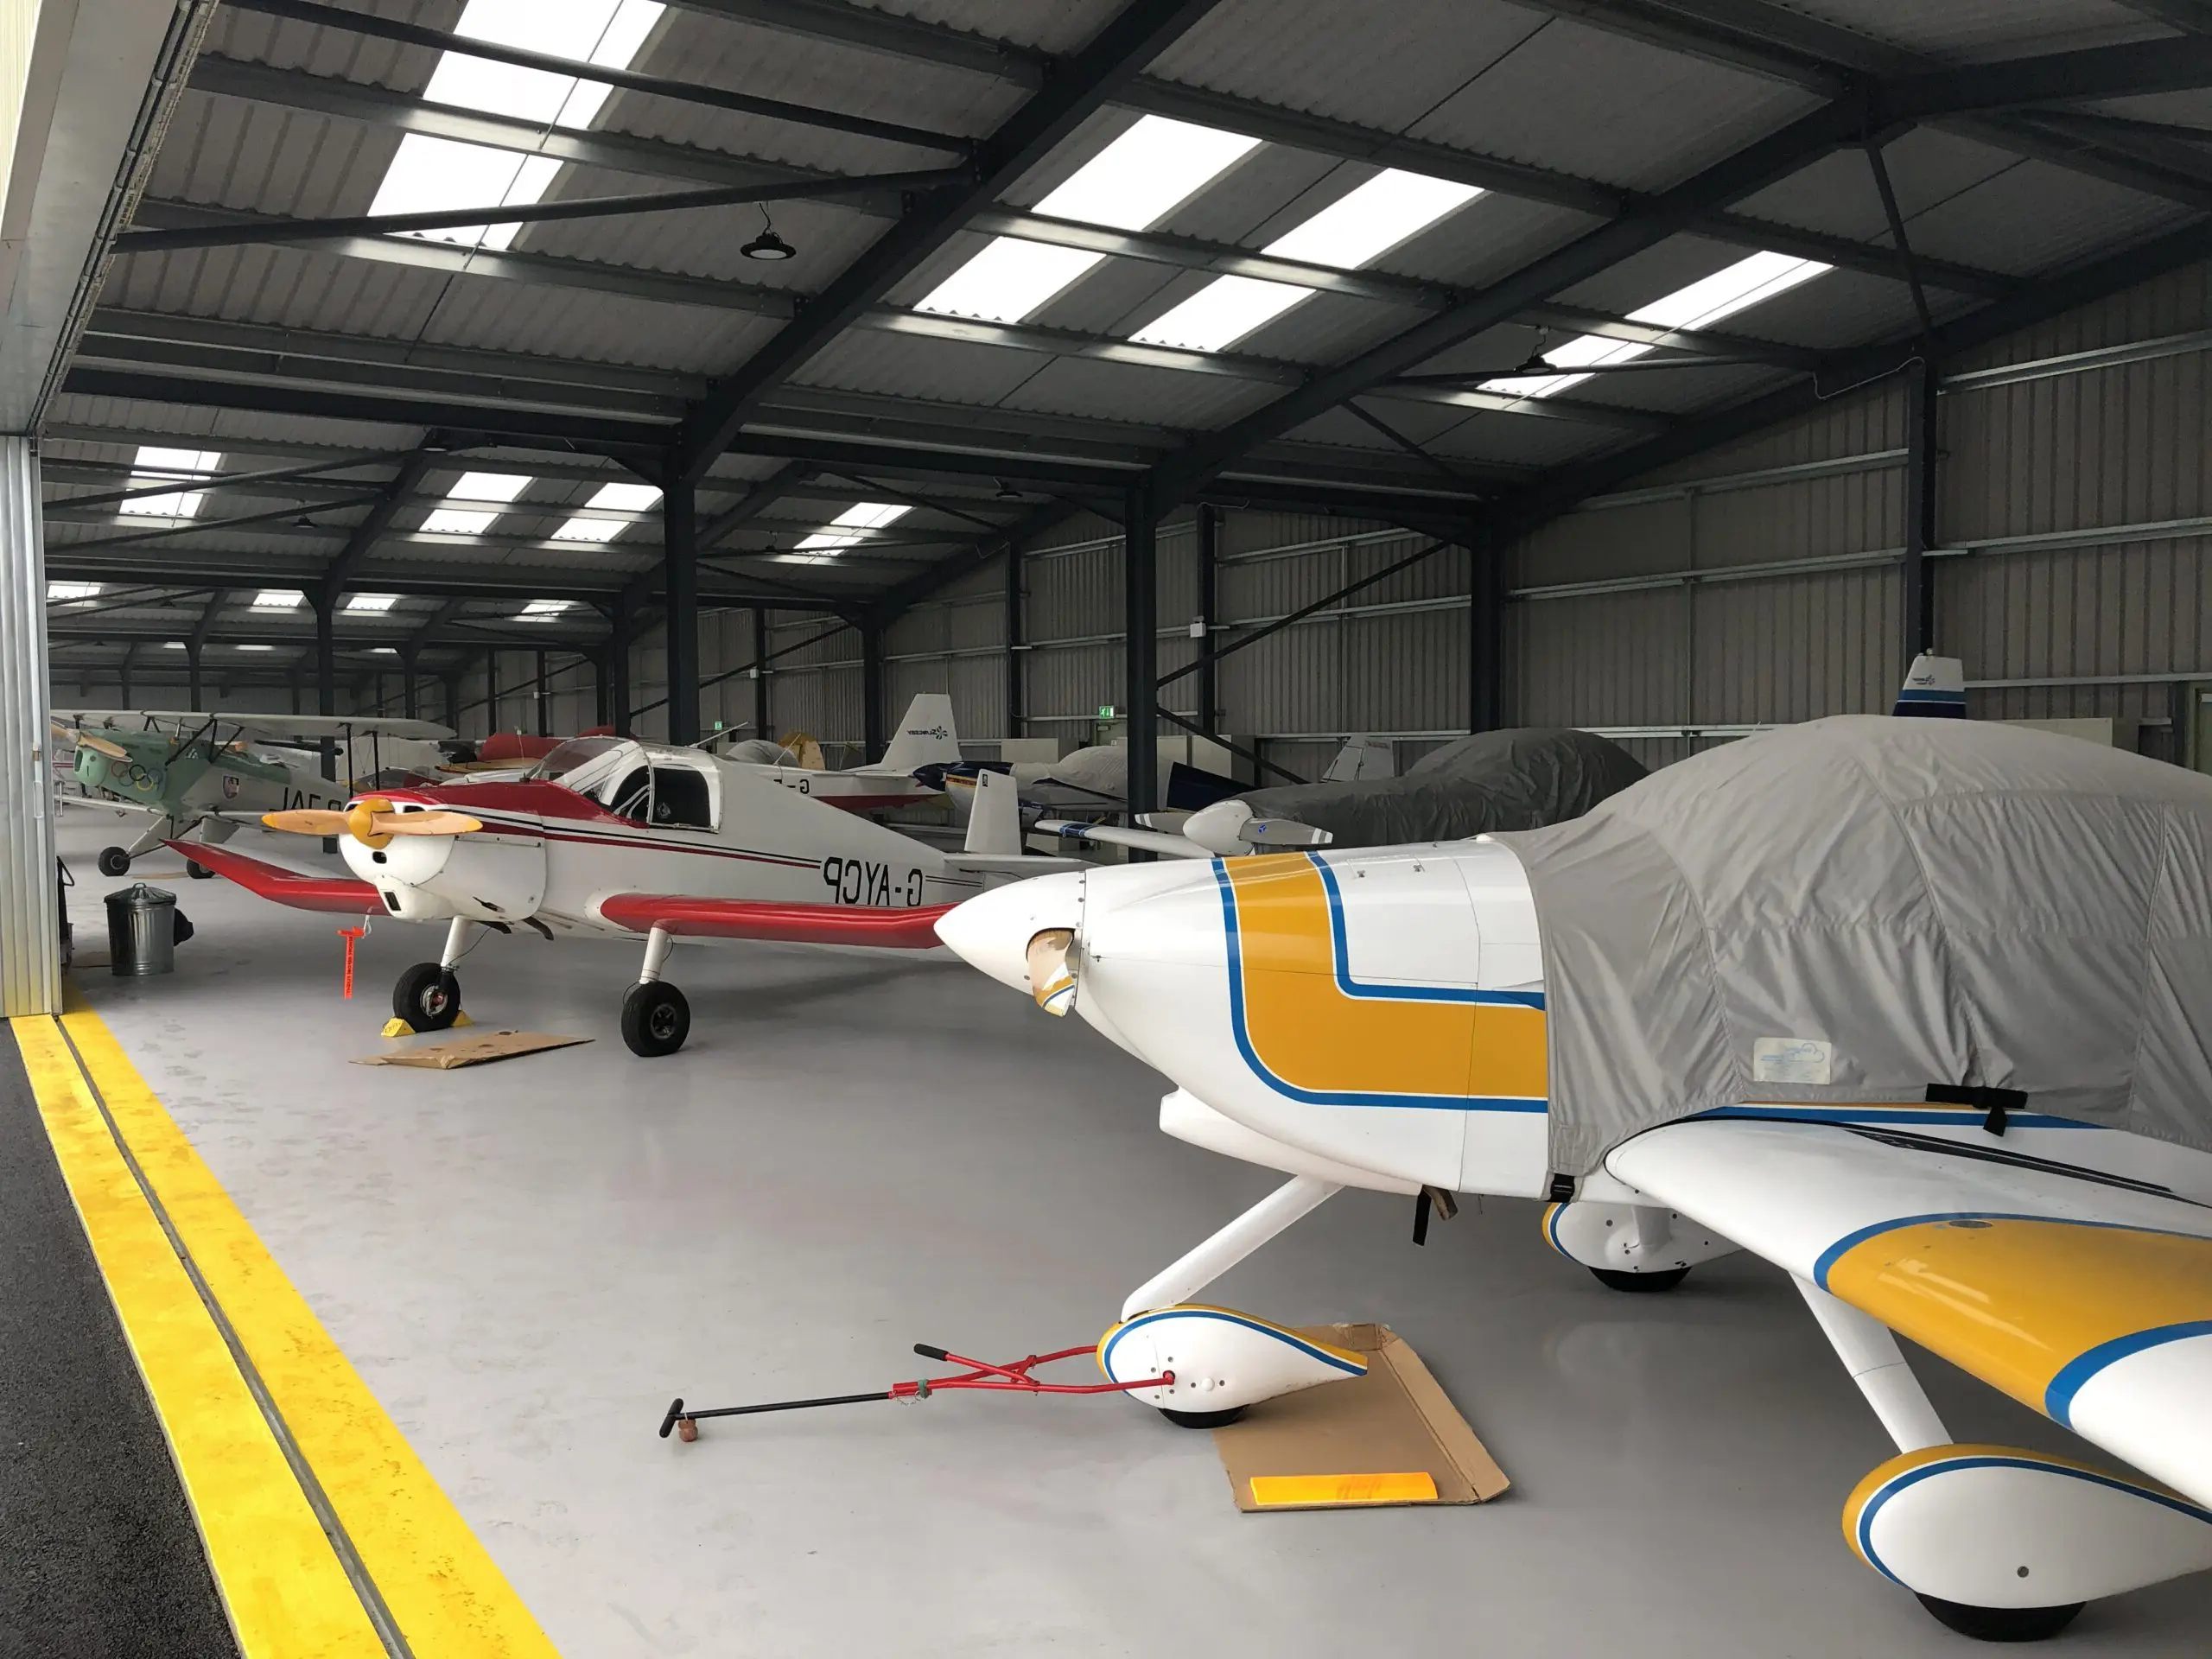 Large aeroplane hanger with many private aircraft at Breighton Aerodrome